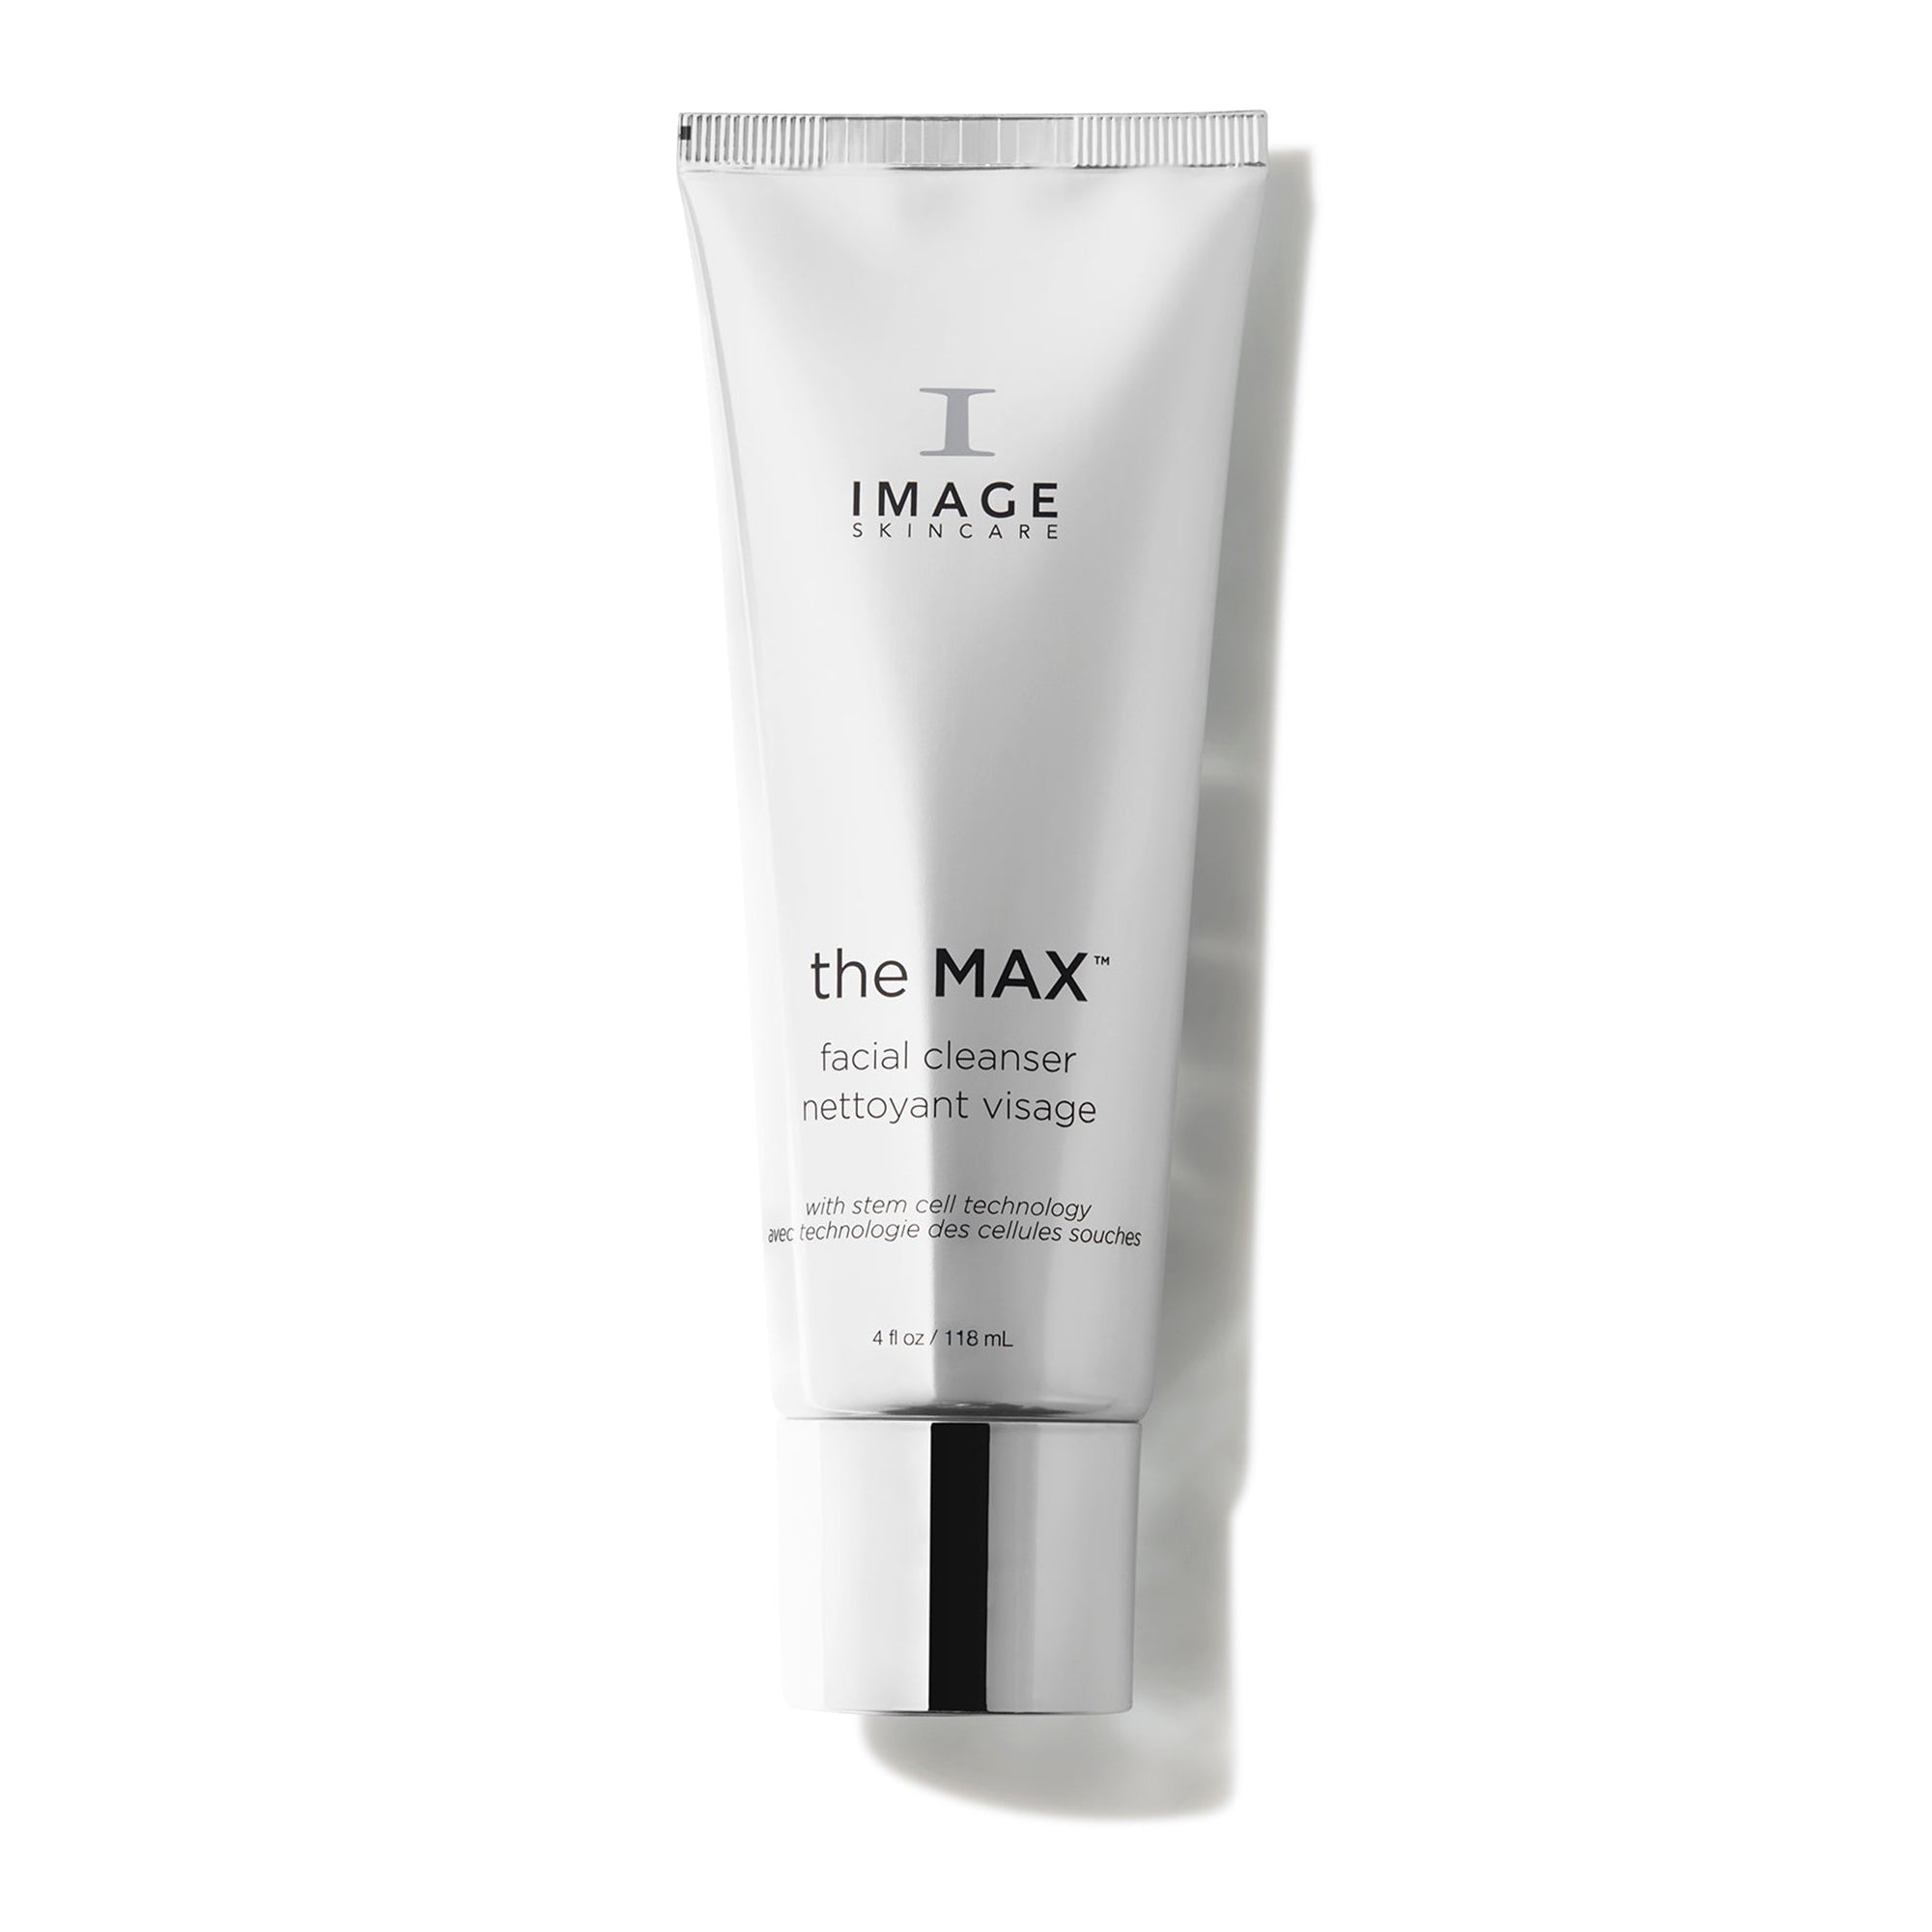 Image Skincare The Max Facial Cleanser / 4OZ